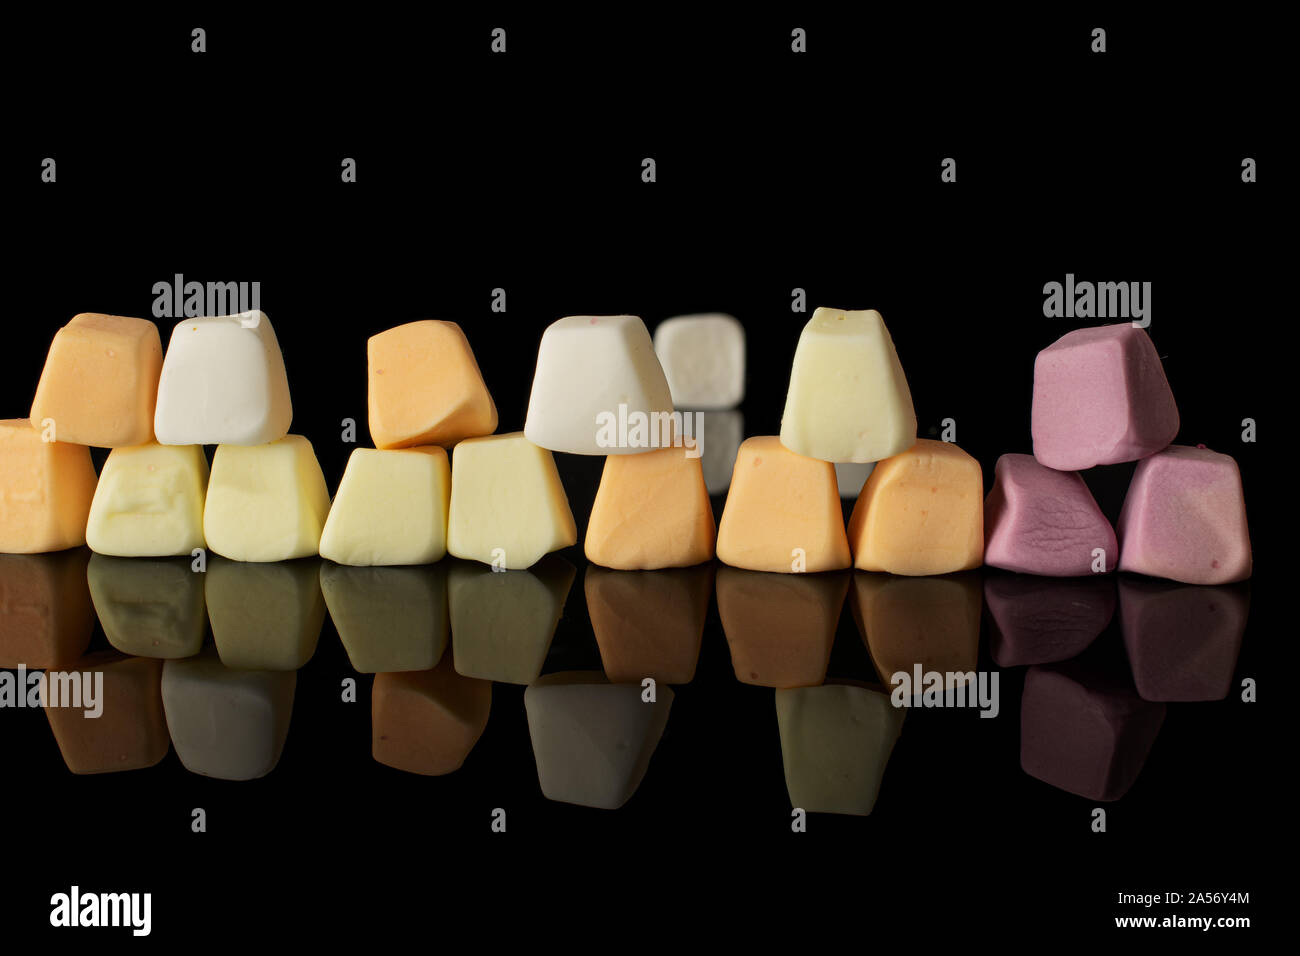 Lot of whole arranged soft pastel candy isolated on black glass Stock Photo